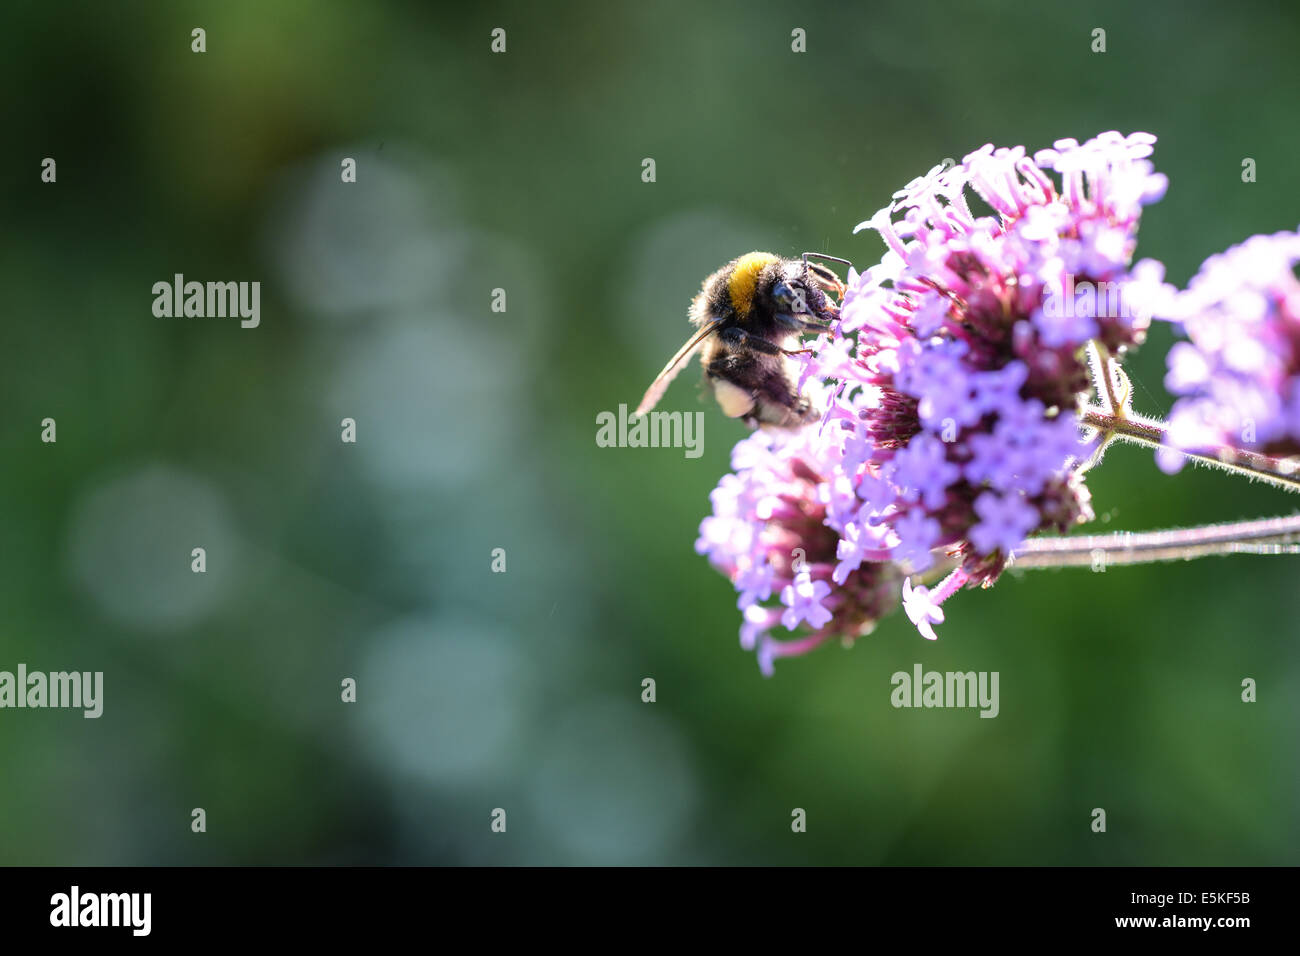 A bee on a flower. Stock Photo